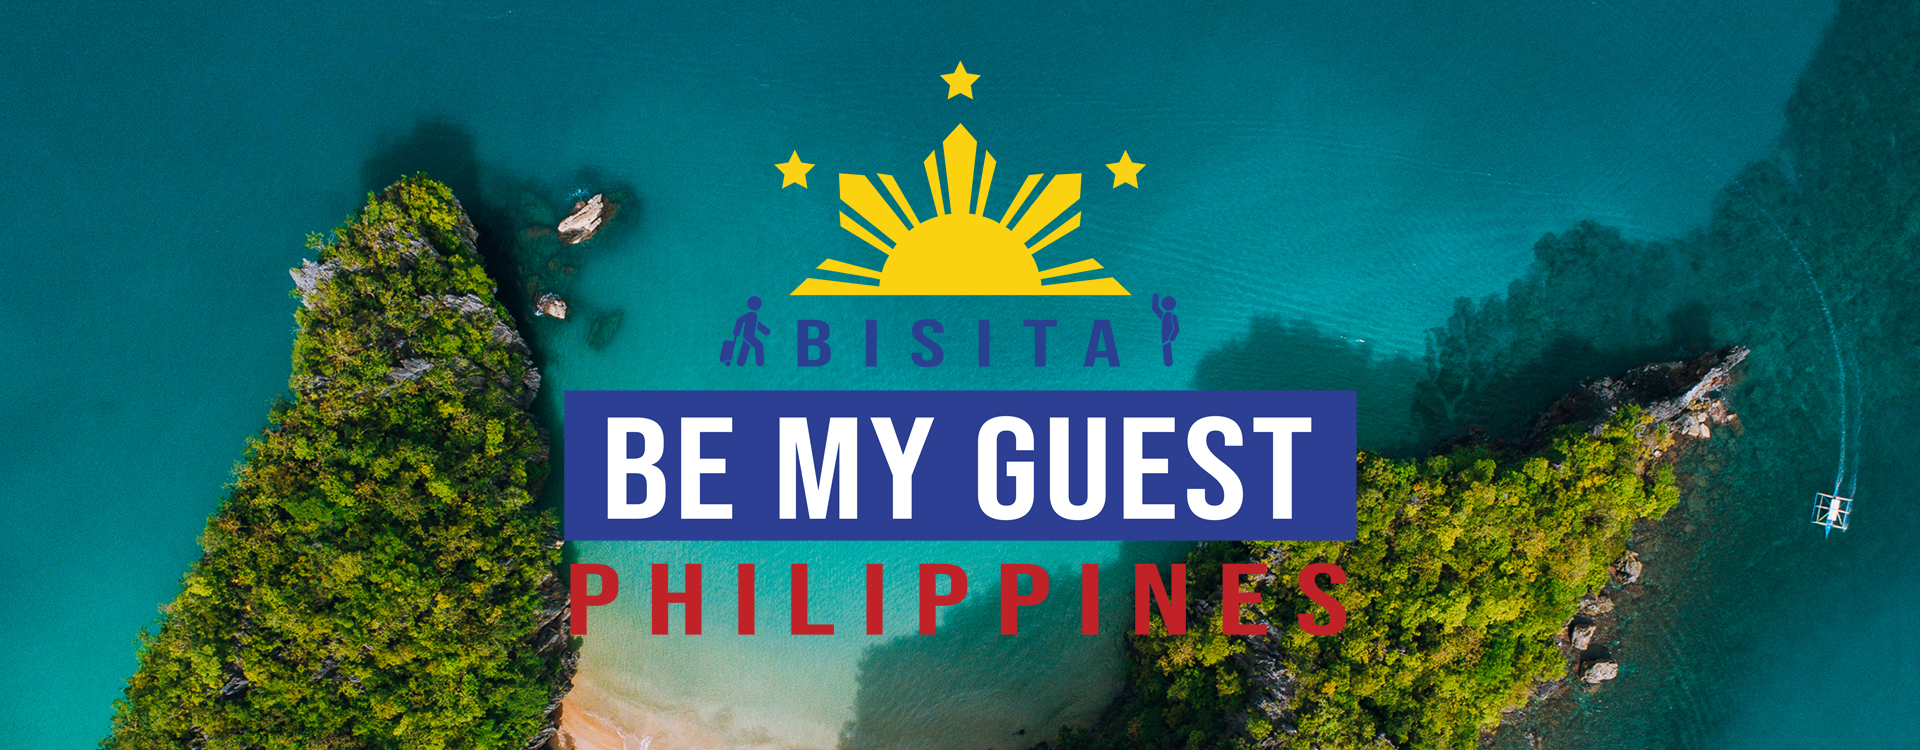 Bisita, Be My Guest Campaign